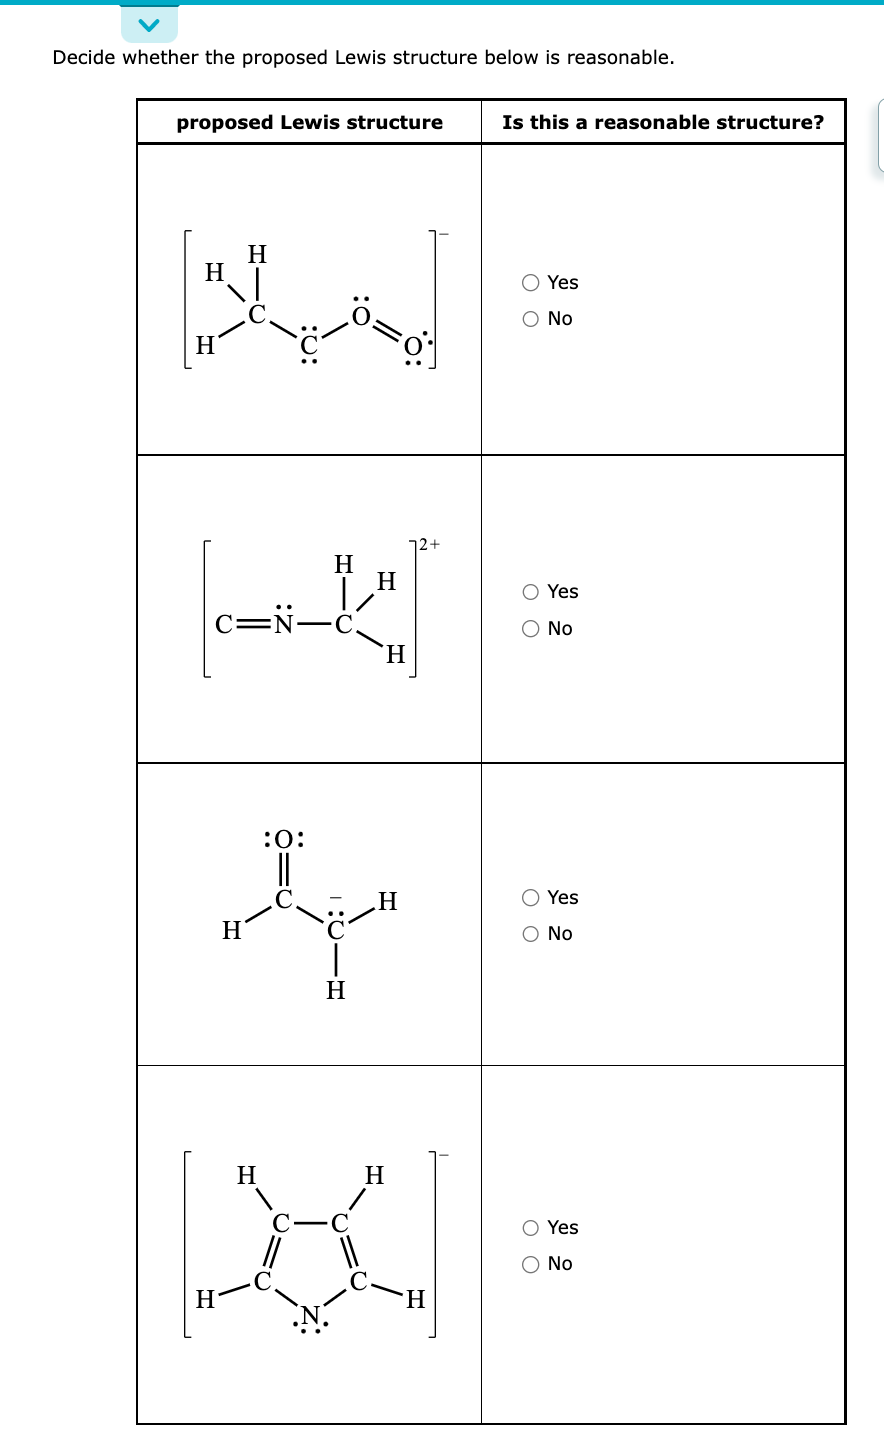 Decide whether the proposed Lewis structure below is reasonable.
proposed Lewis structure
H
H
C-N-
H
H
H
:O:
H
H
H
o
H
H
H
H
X
Is this a reasonable structure?
O Yes
O No
O O
O O
Yes
O O
No
Yes
O No
O Yes
No